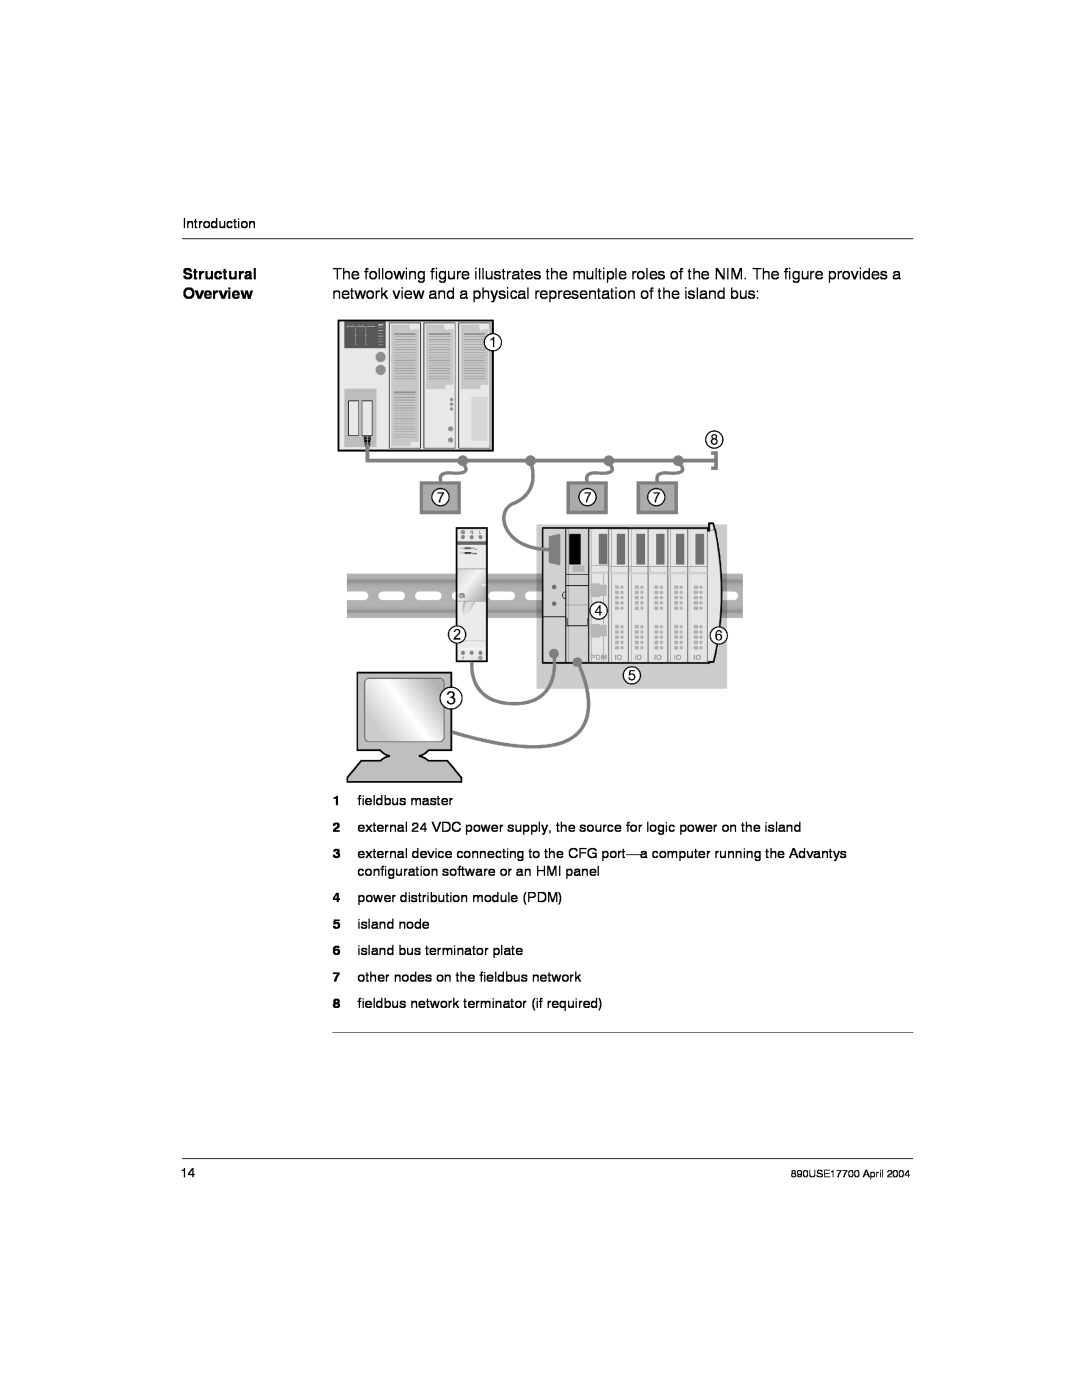 Schneider Electric 890USE17700 manual Structural, Overview, network view and a physical representation of the island bus 